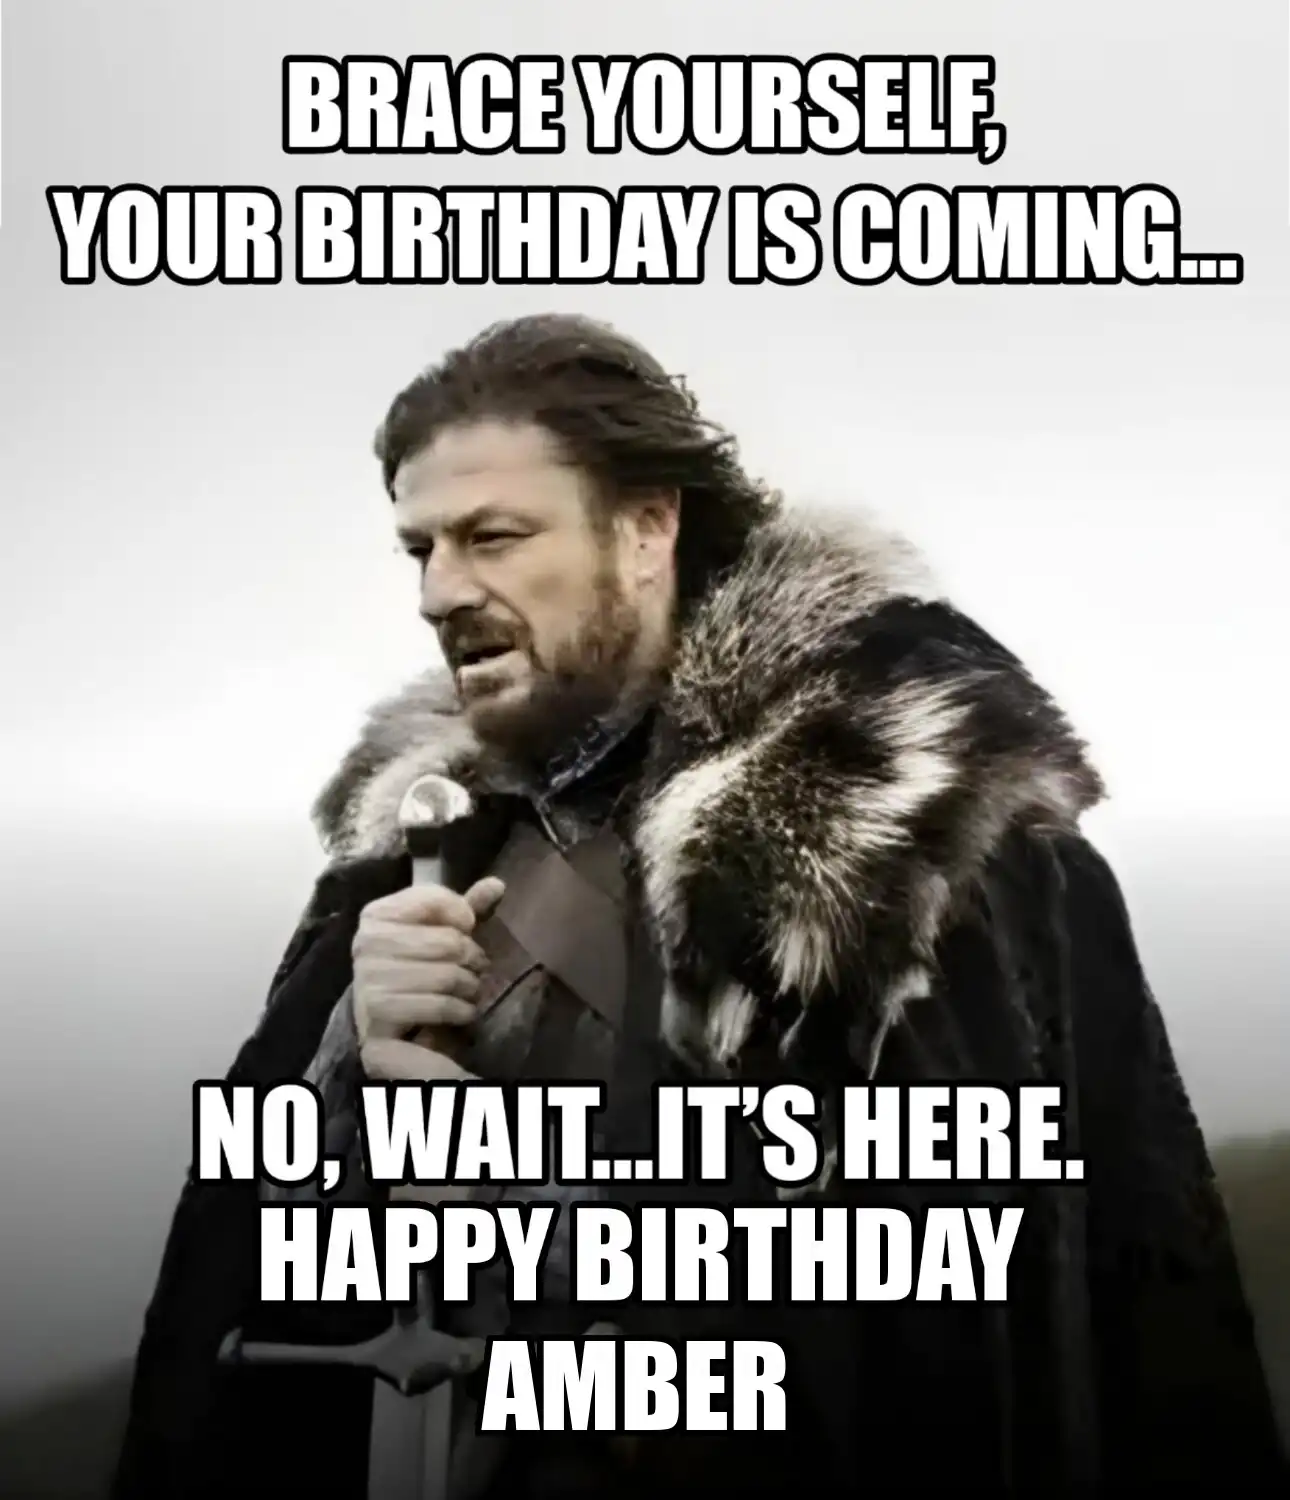 Happy Birthday Amber Brace Yourself Your Birthday Is Coming Meme